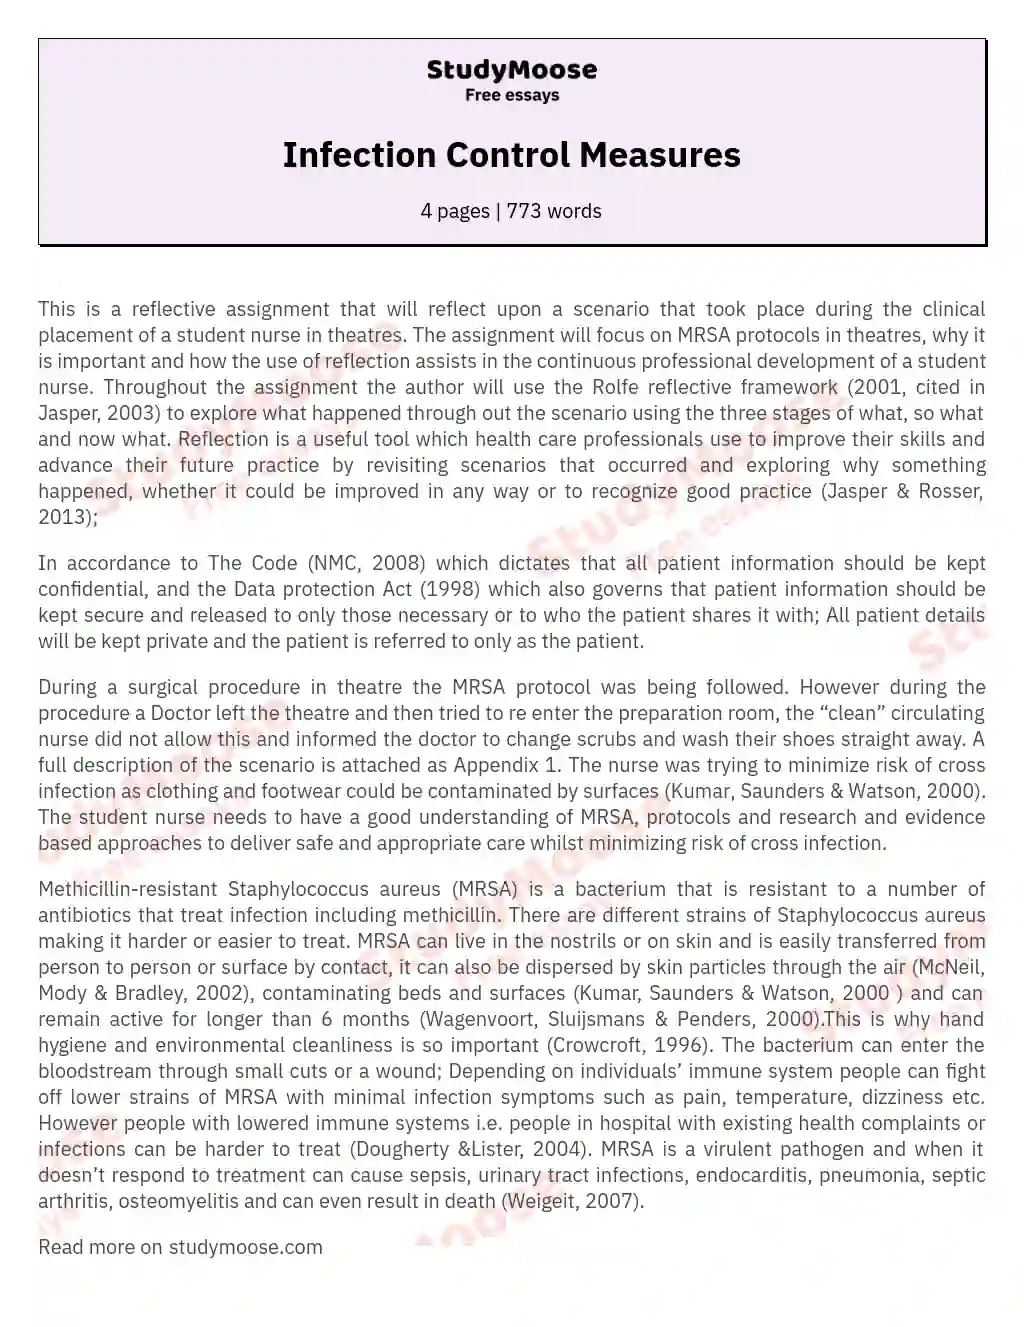 Infection Control Measures essay